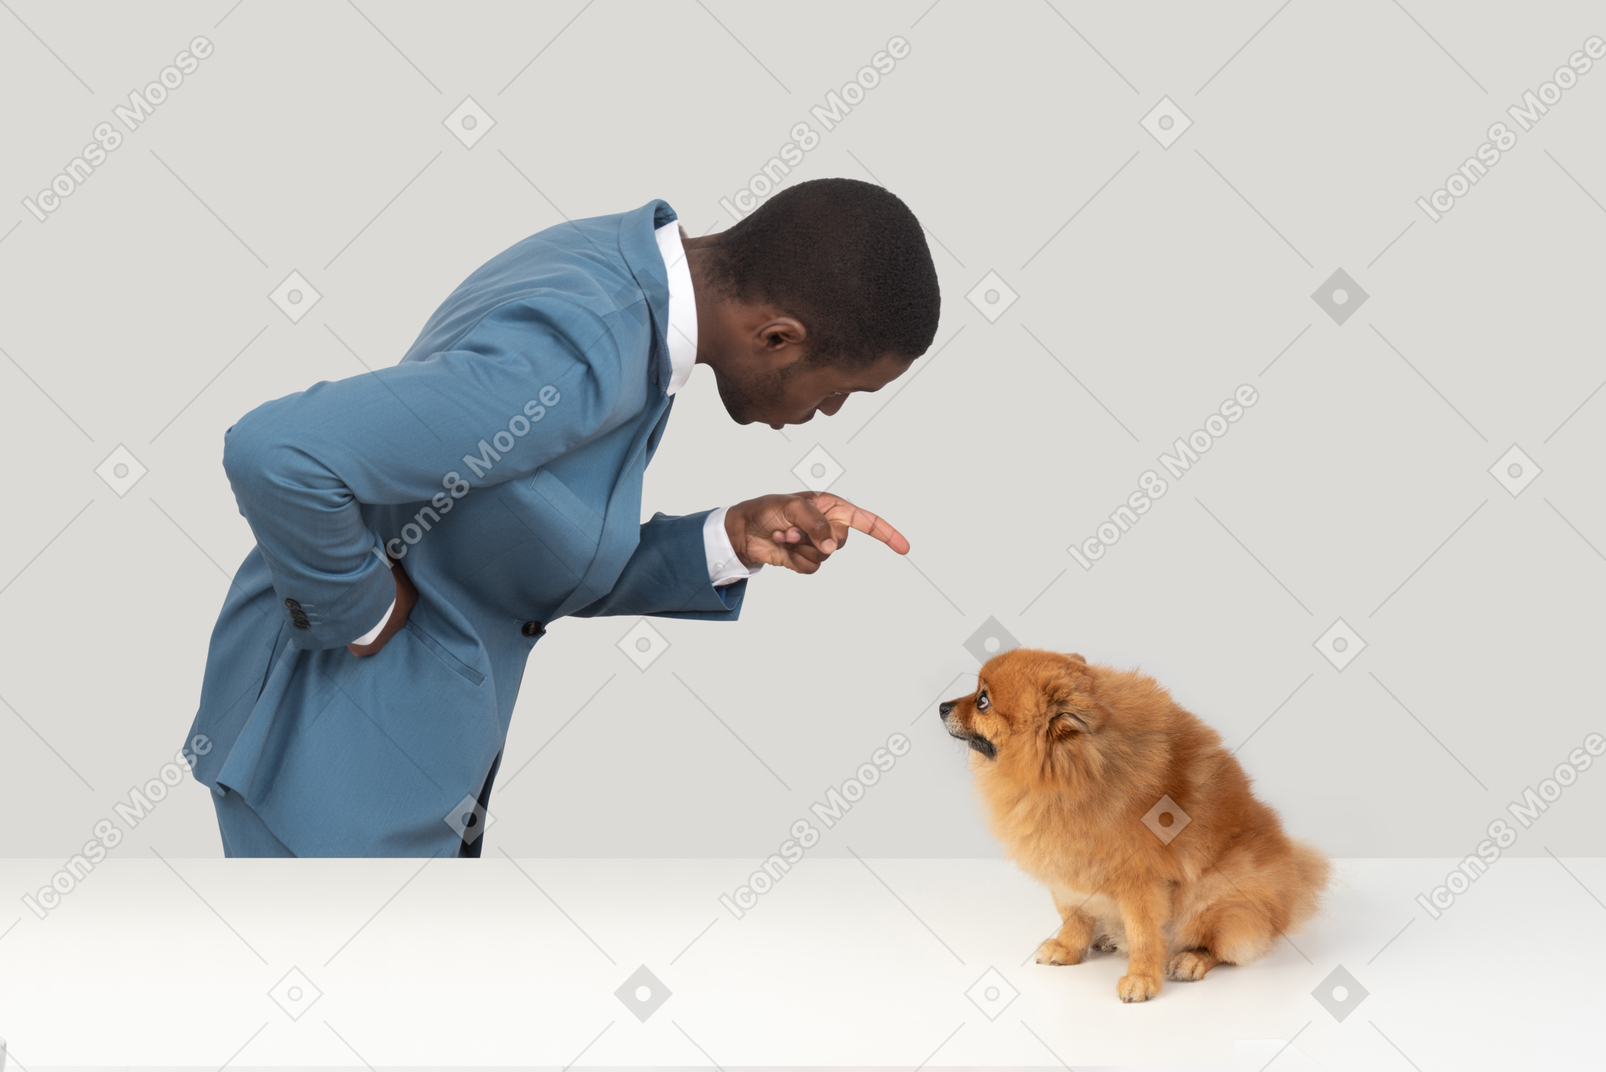 Office worker yelling at red spitz dog